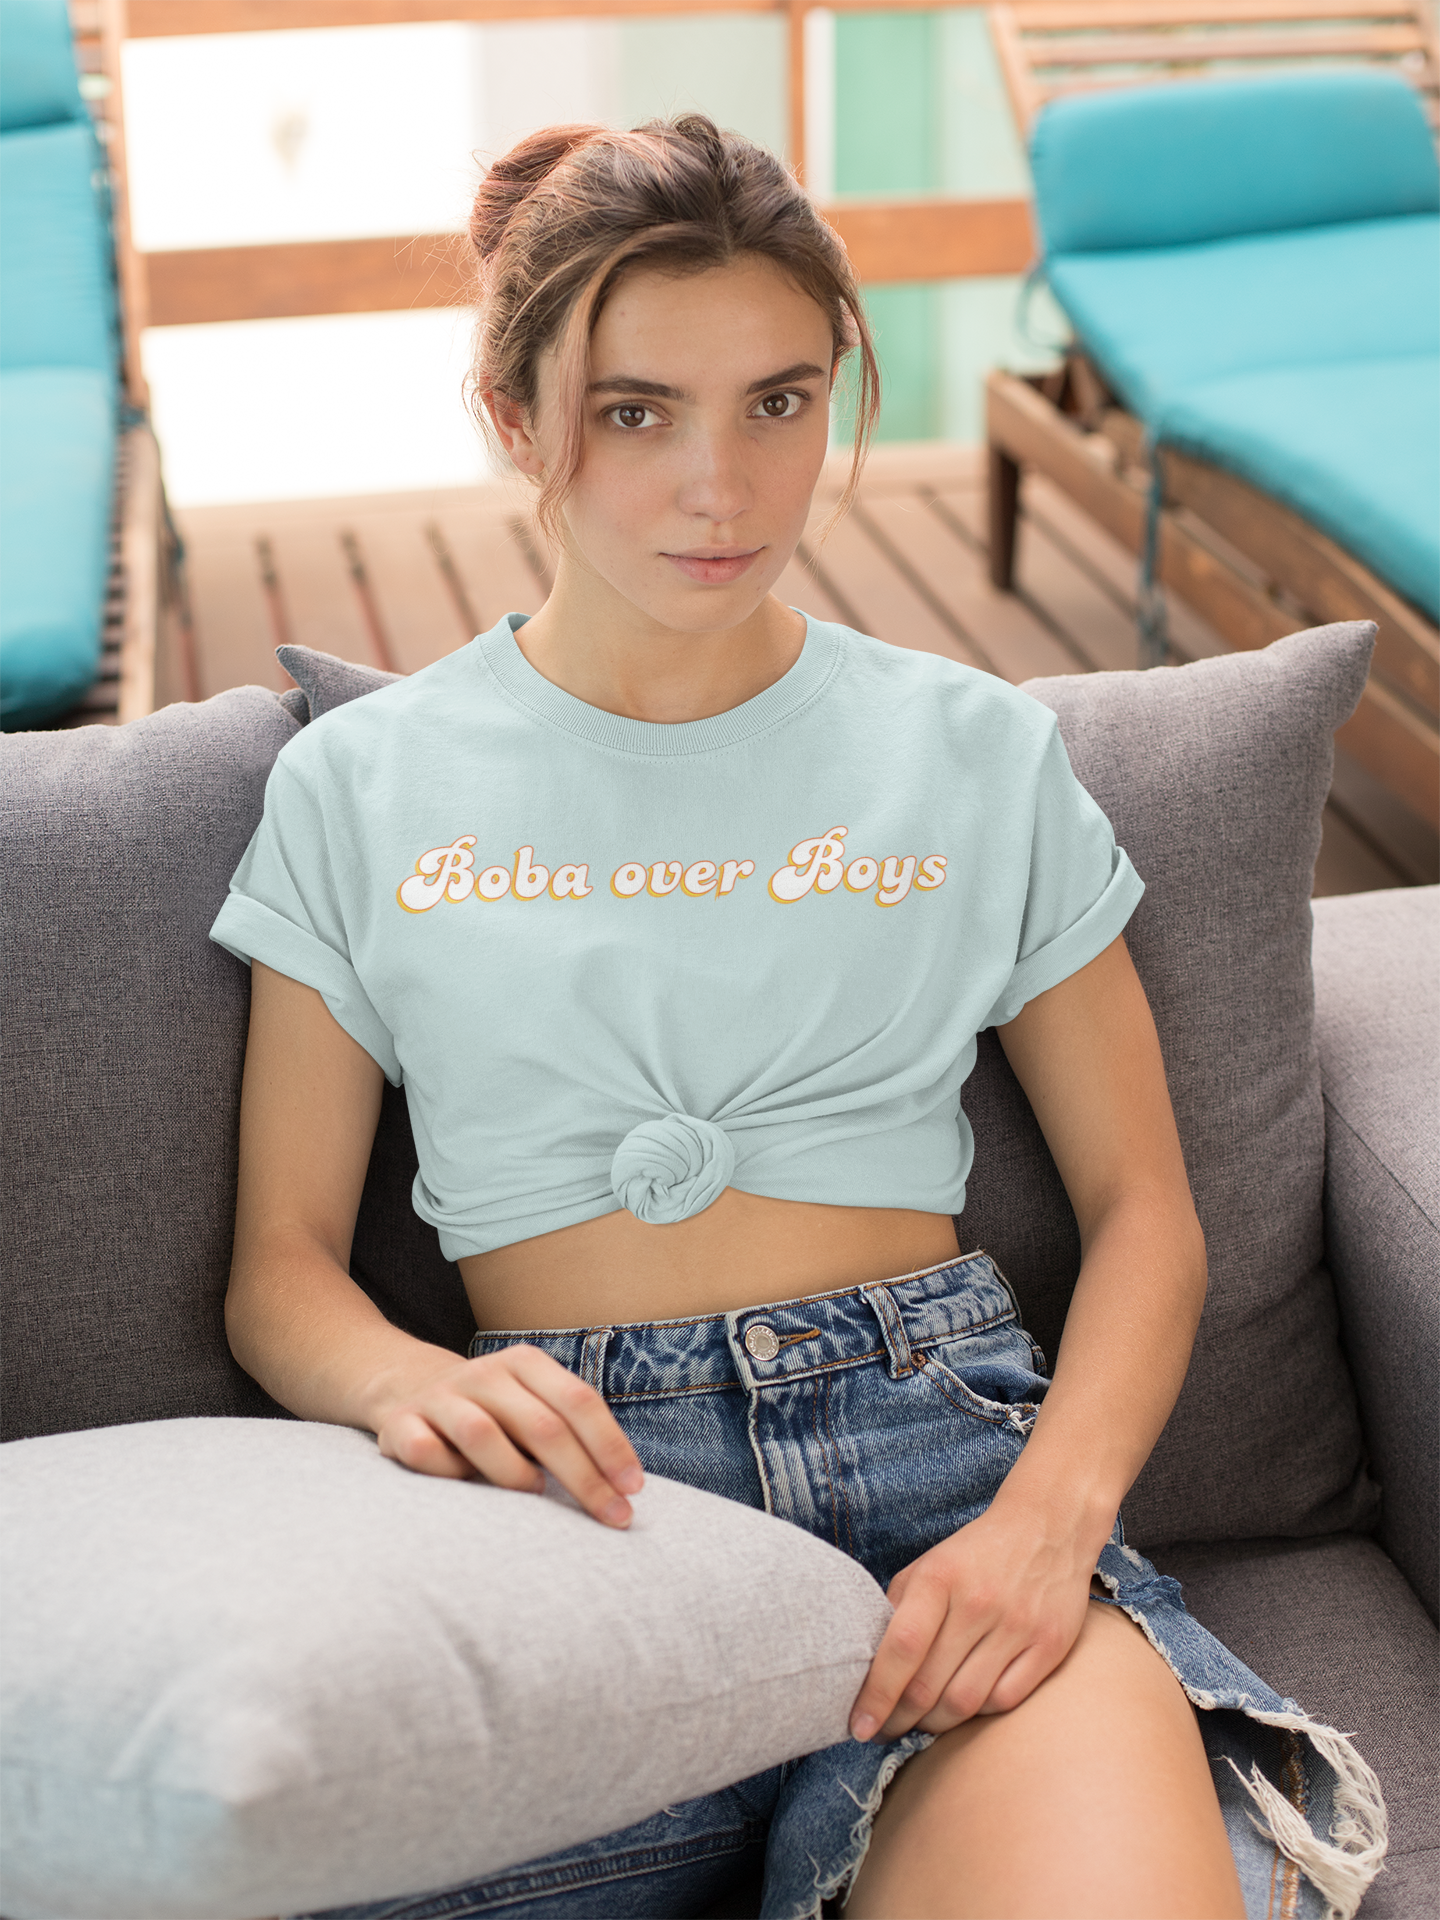 A woman wearing Boba over Boys boba shirt on the couch